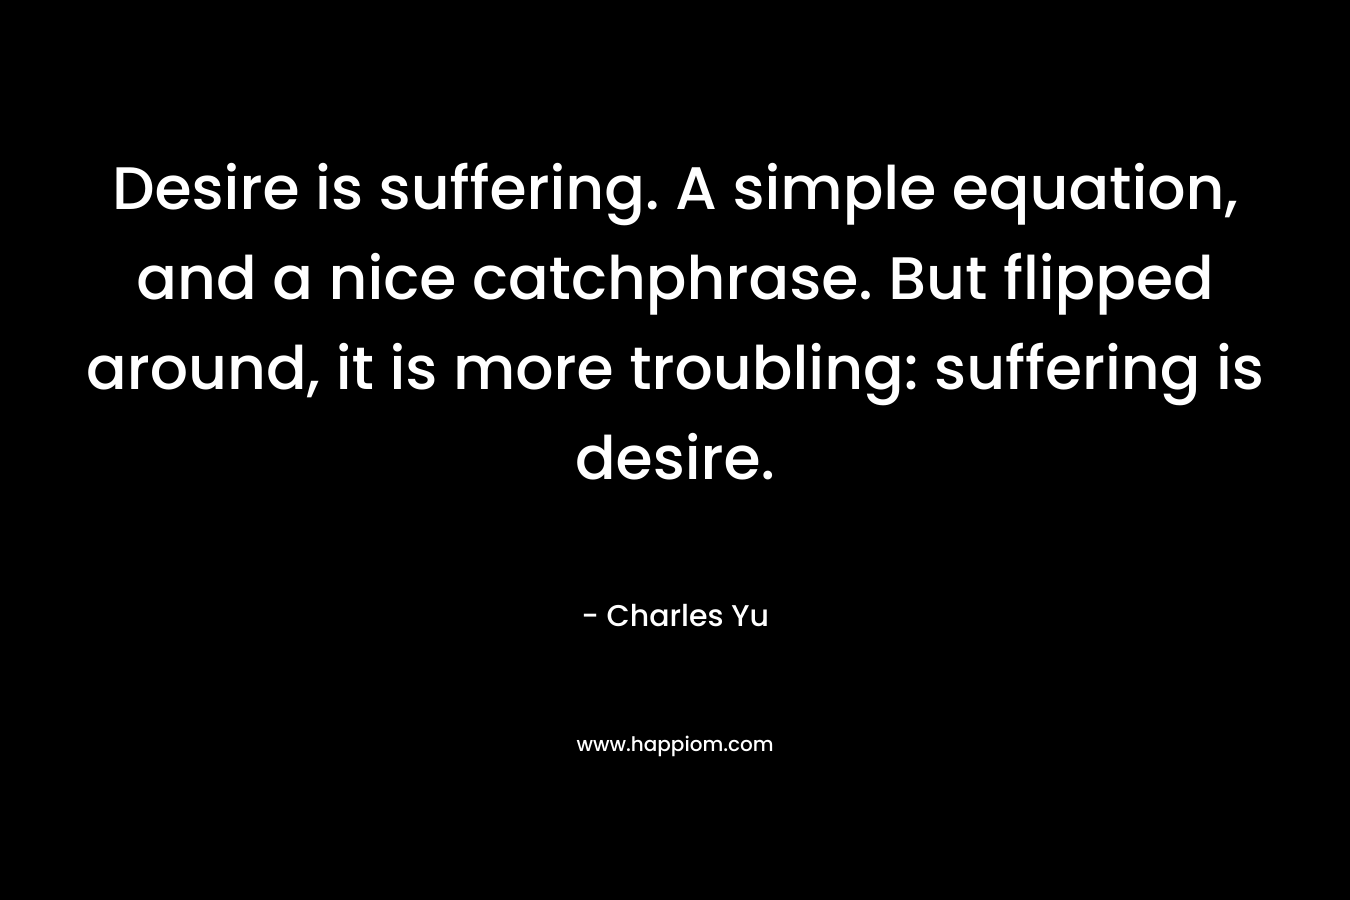 Desire is suffering. A simple equation, and a nice catchphrase. But flipped around, it is more troubling: suffering is desire.